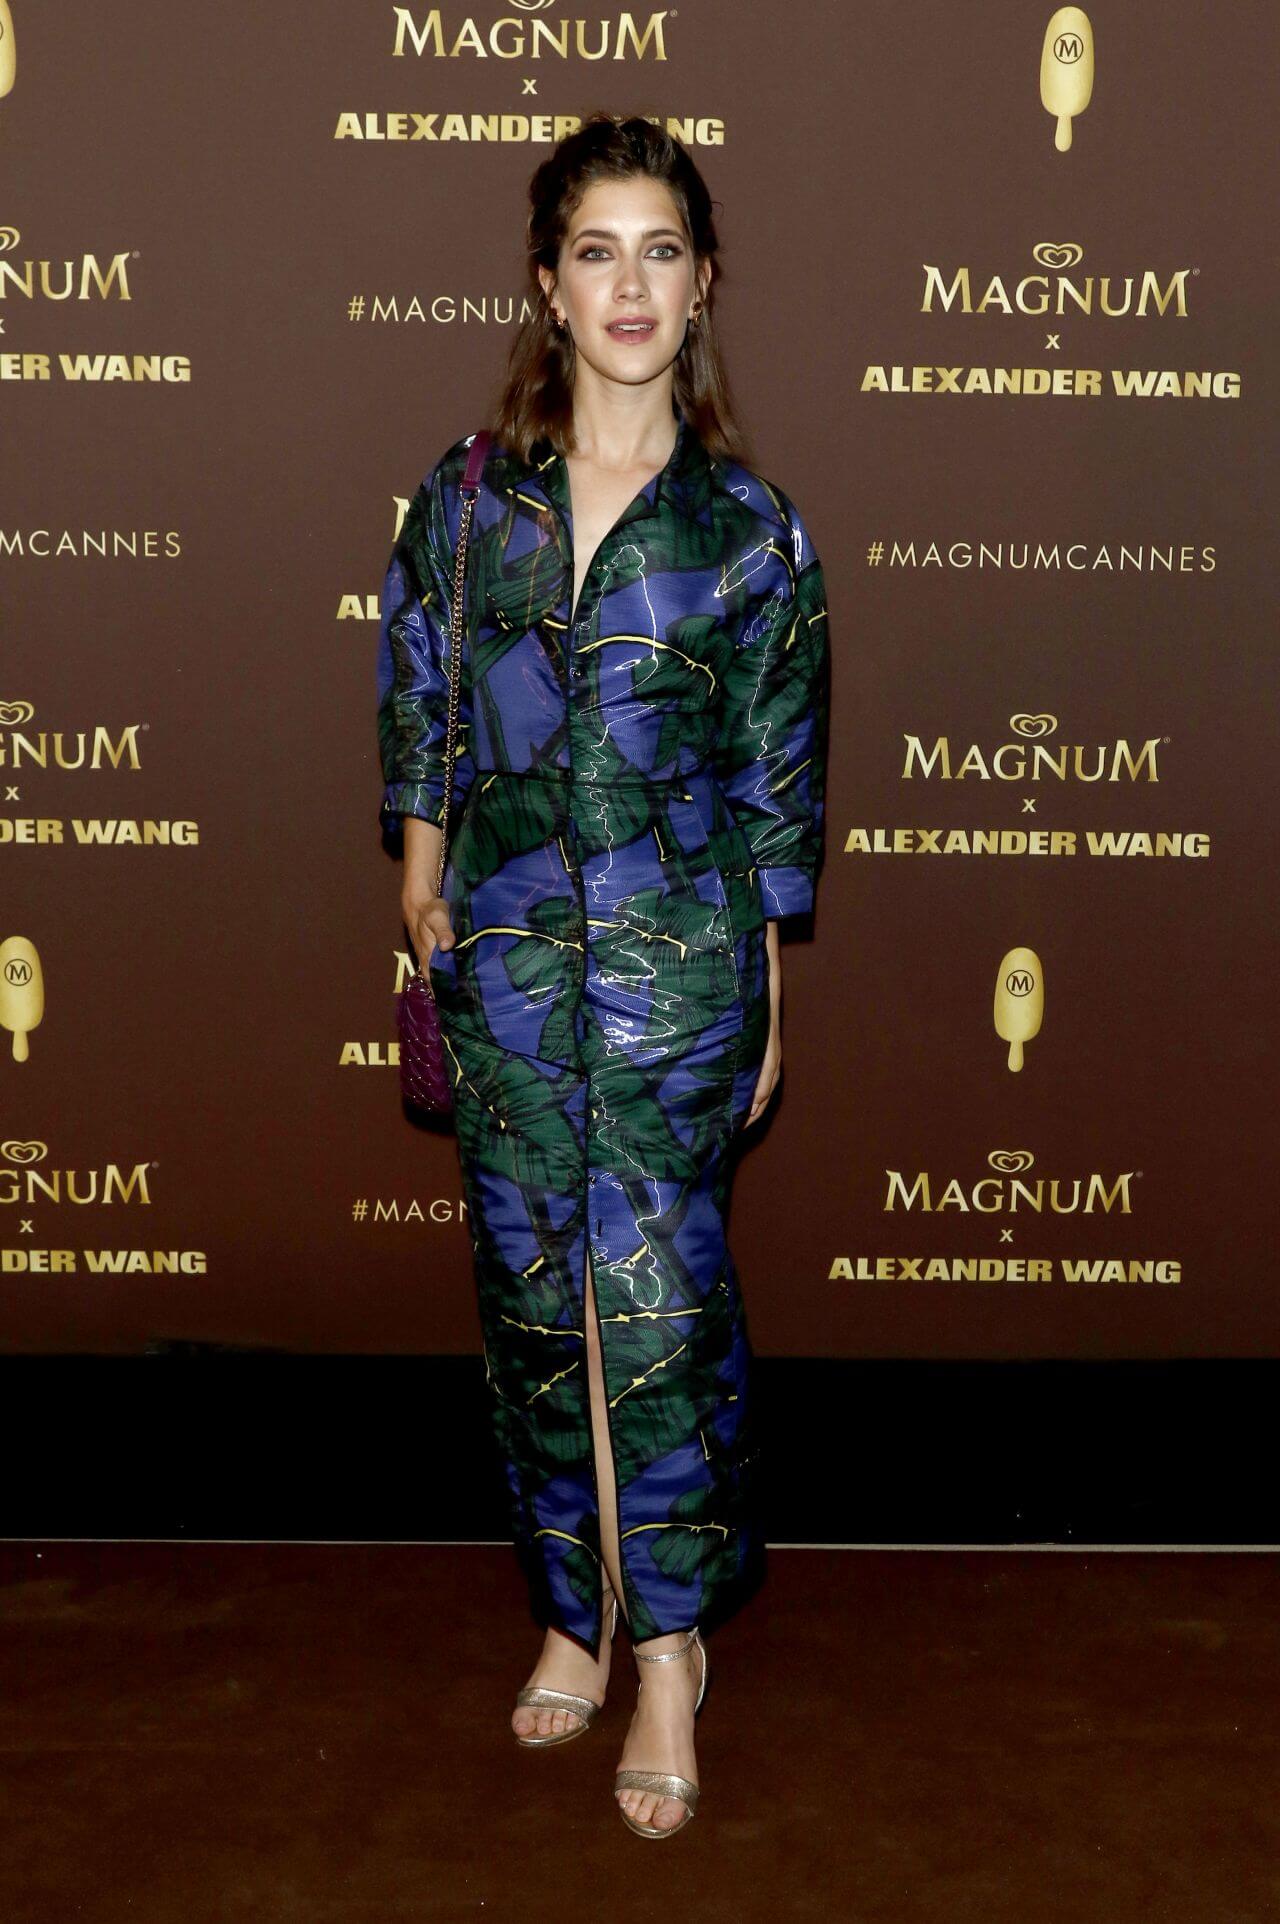 Clara Alonso In Printed Full Sleeves Leather Long Dress At Magnum x Alexander Wang Party in Cannes